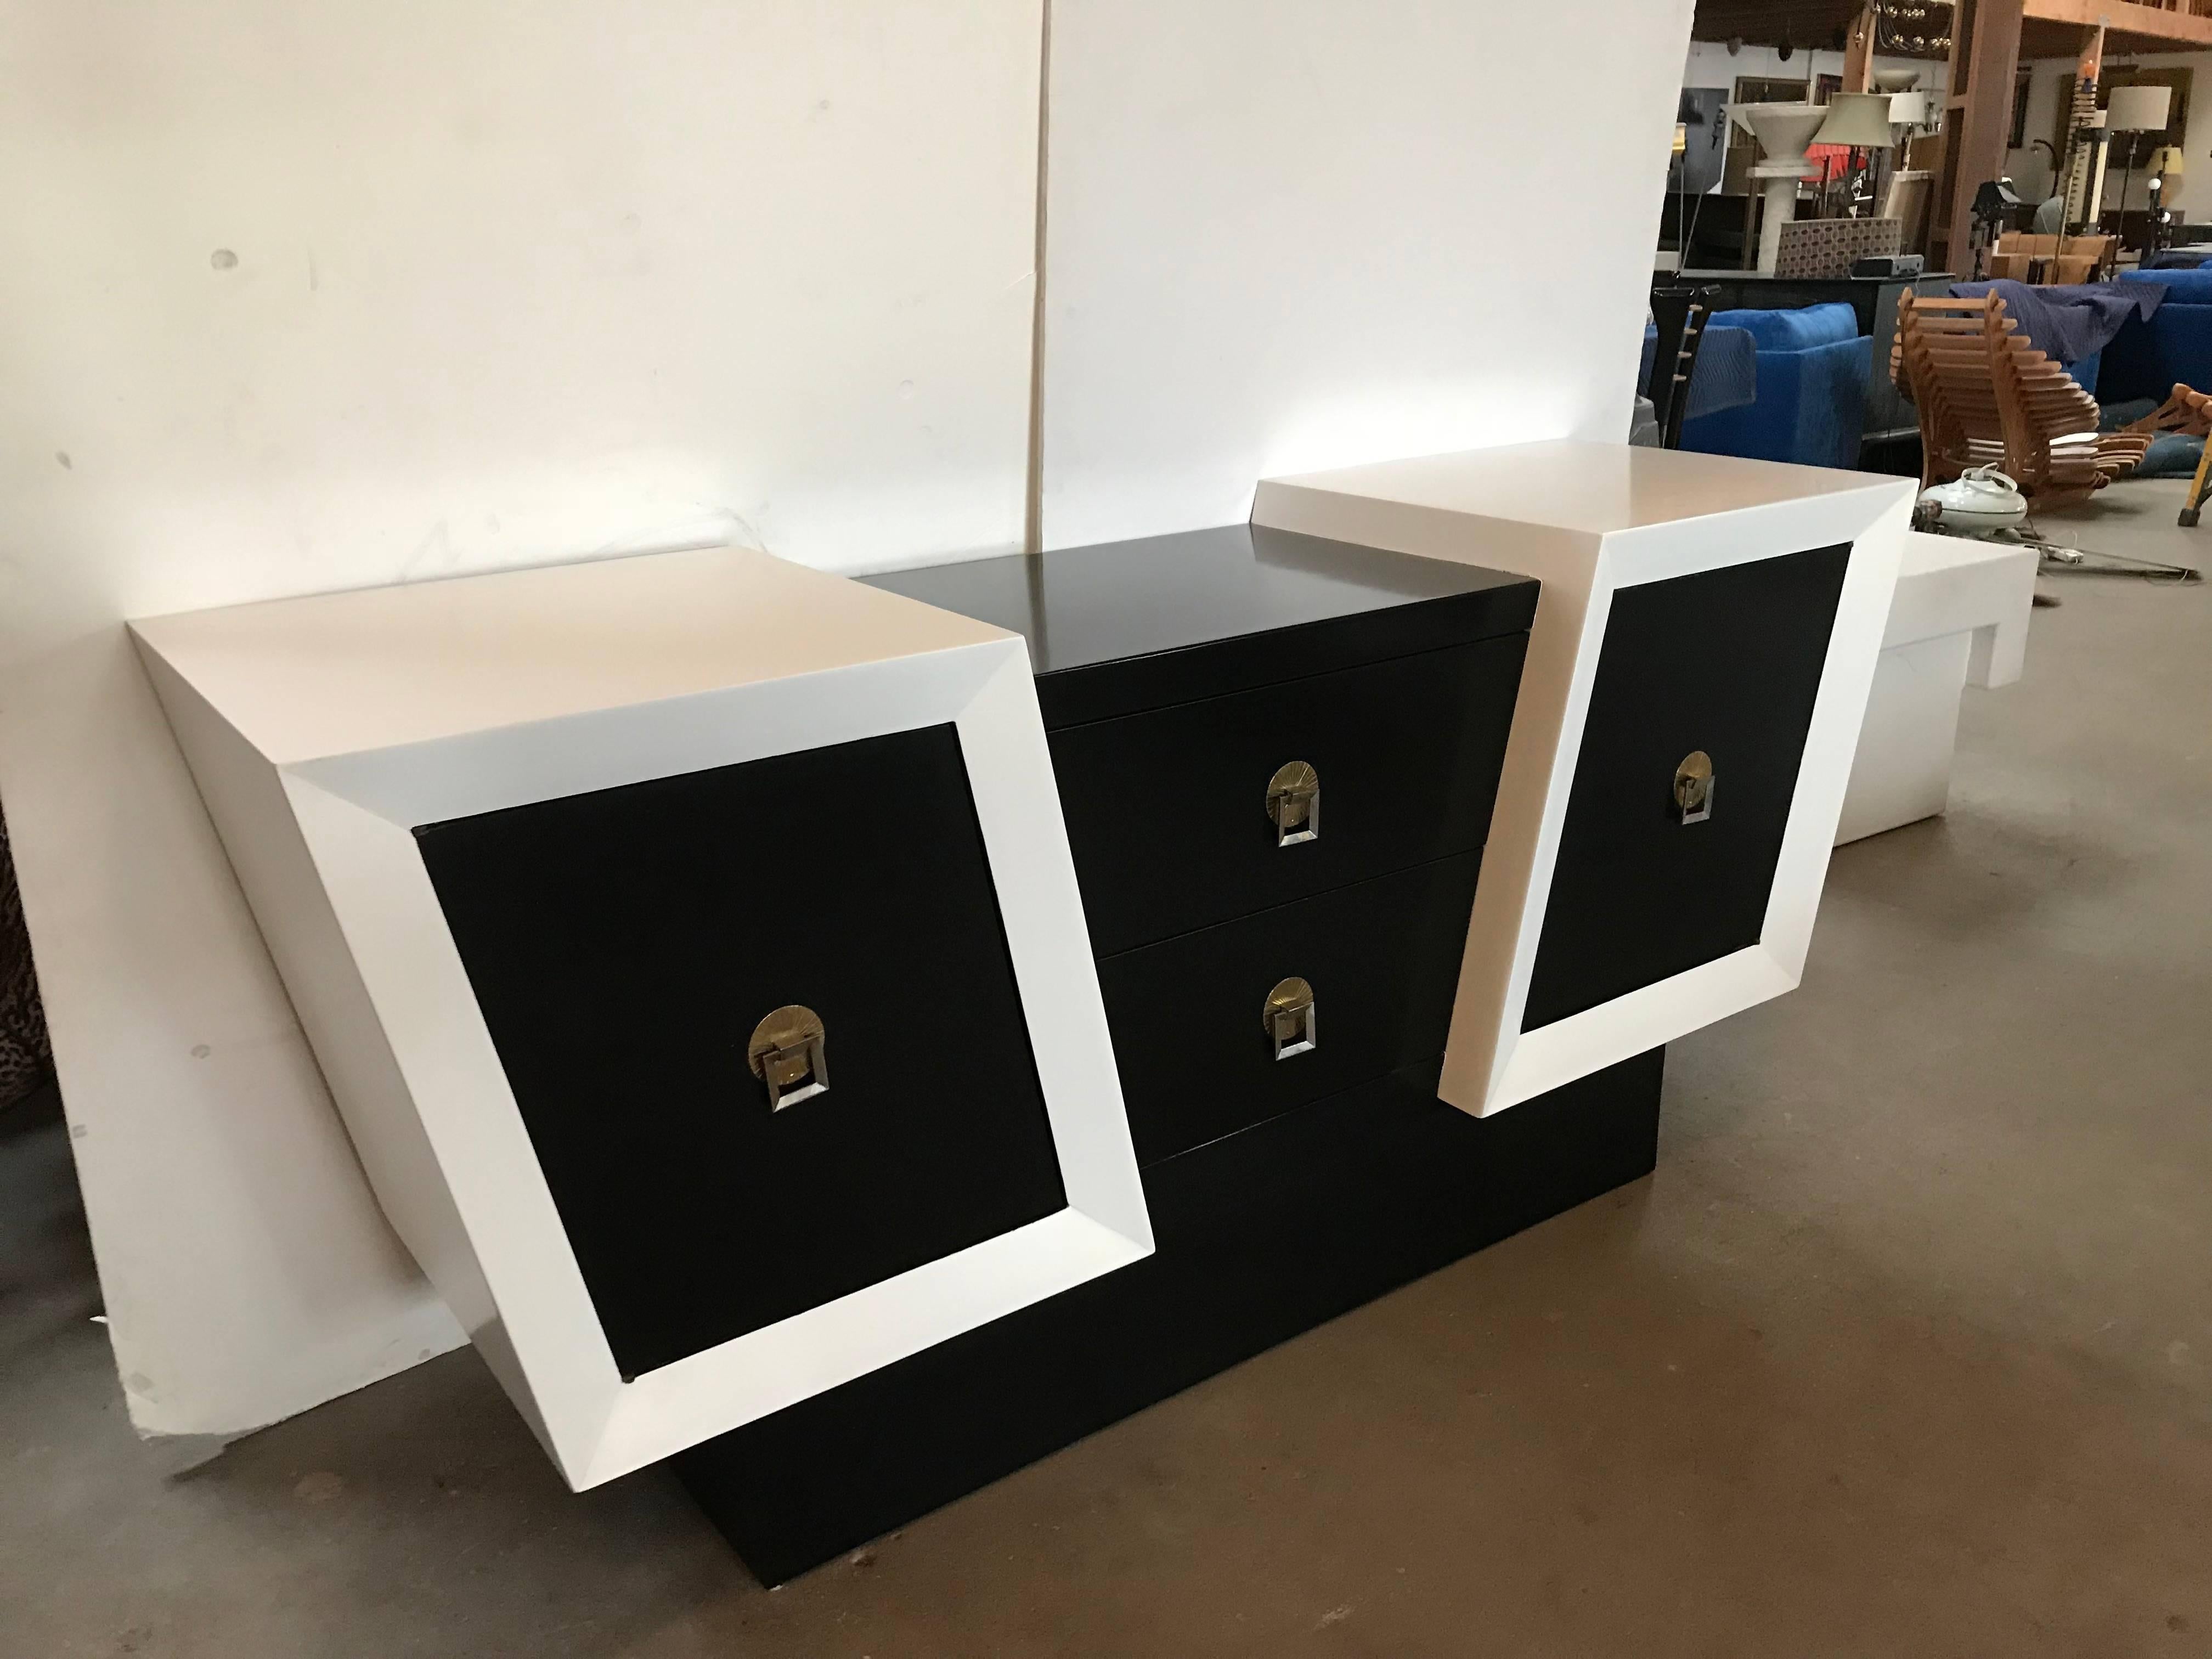 Unusual oak credenza in black and white lacquer with brass-plated hardware. Unique diagonal design has two pull out drawers as well as doors on either side that open to reveal shelves. Newly refinished. 


Not only would you have an incredible